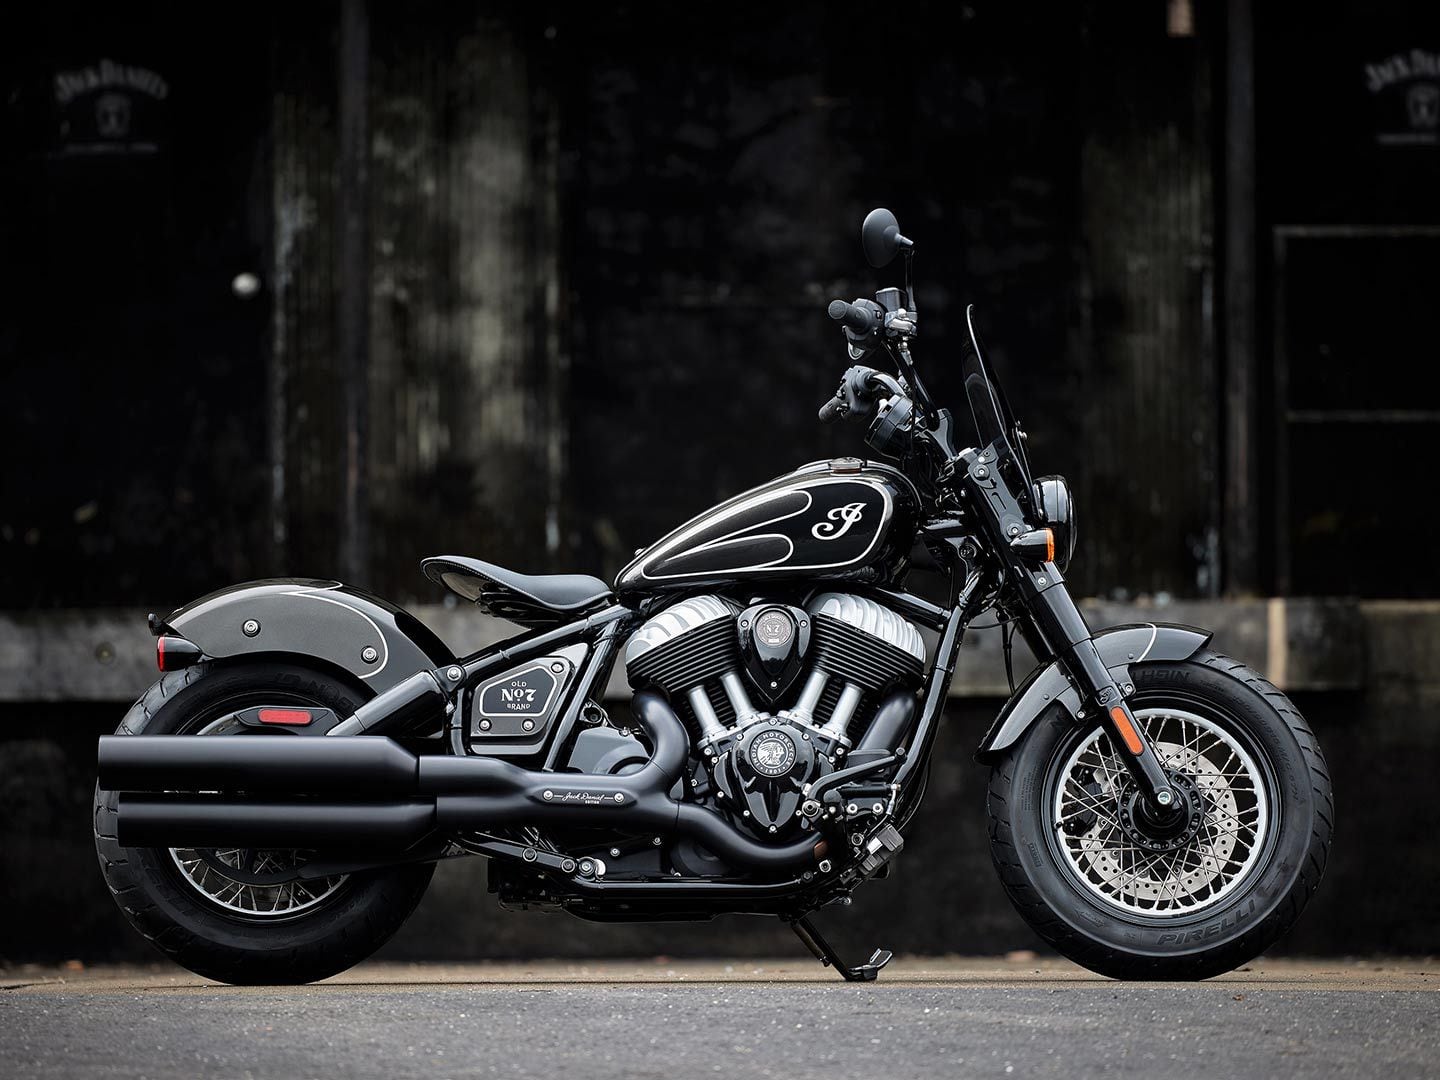 Just 177 units of the Jack Daniels Indian Chief Bobber Dark Horse will be made. This limited-edition bike is the seventh collaboration from the two brands.